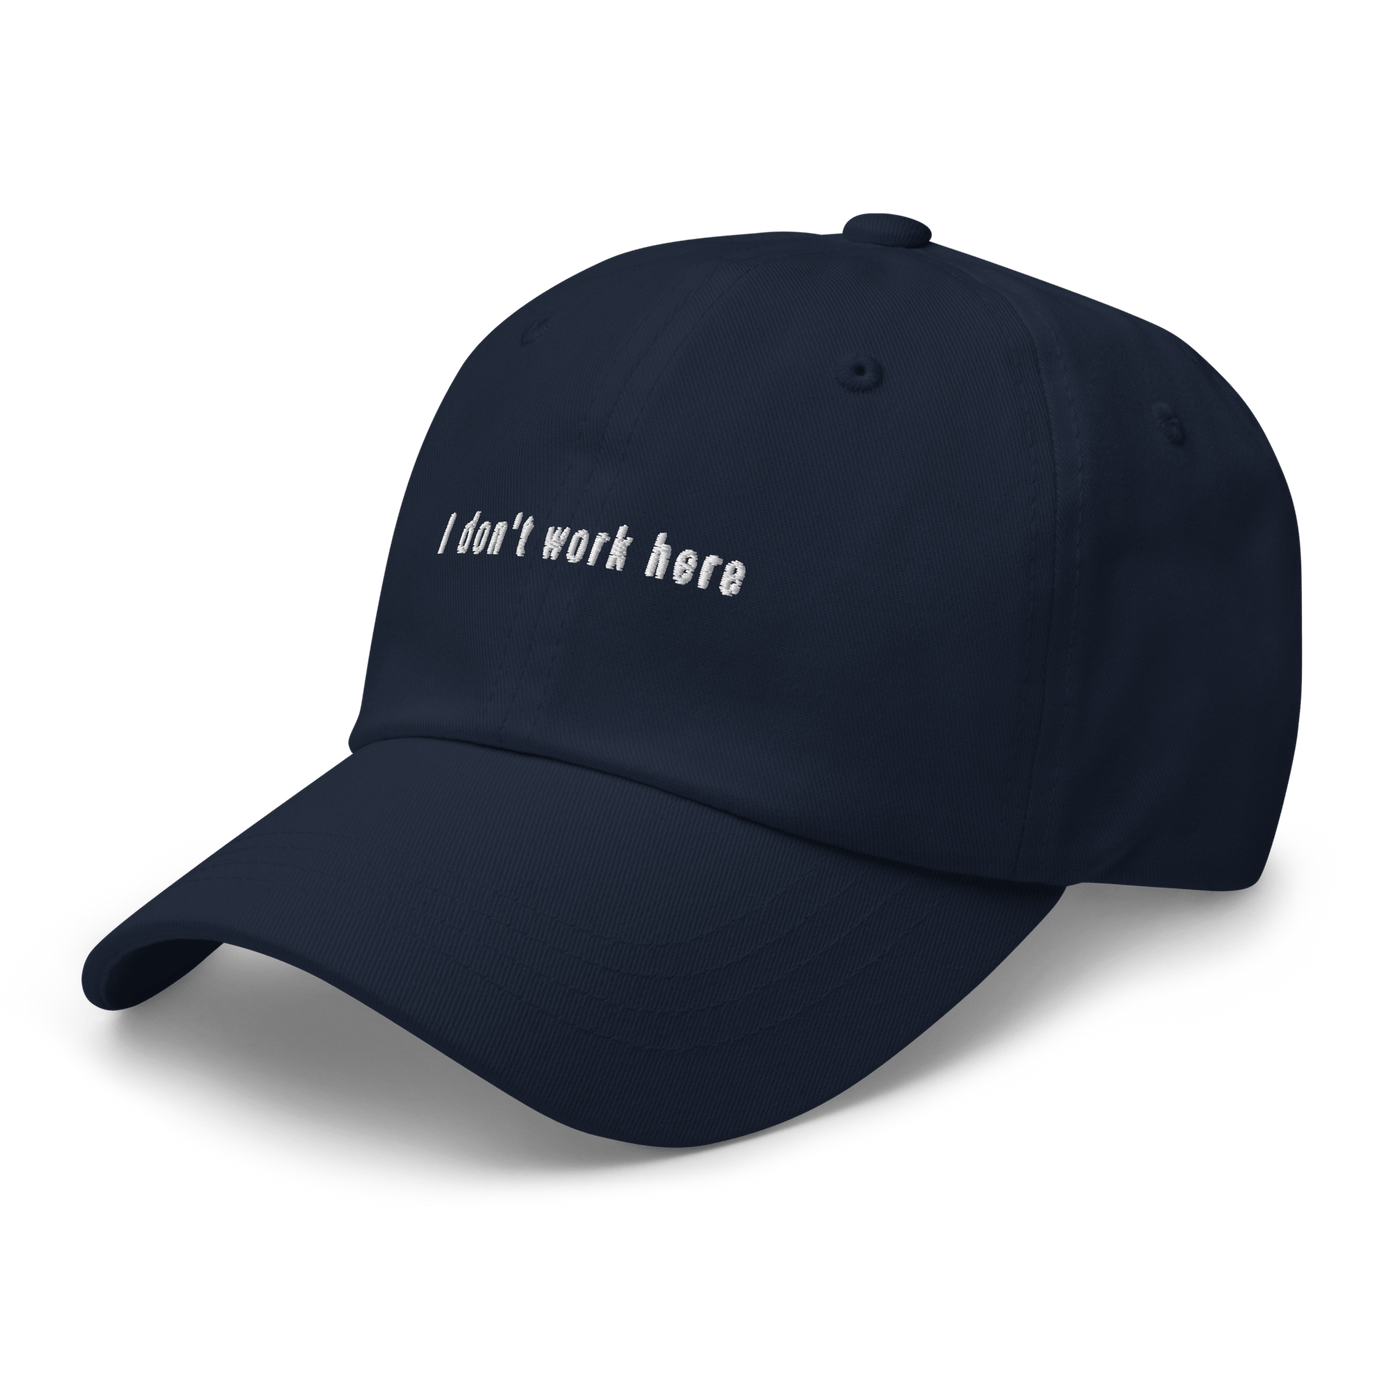 I don't work here Dad hat - Navy - - Just Another Cap Store